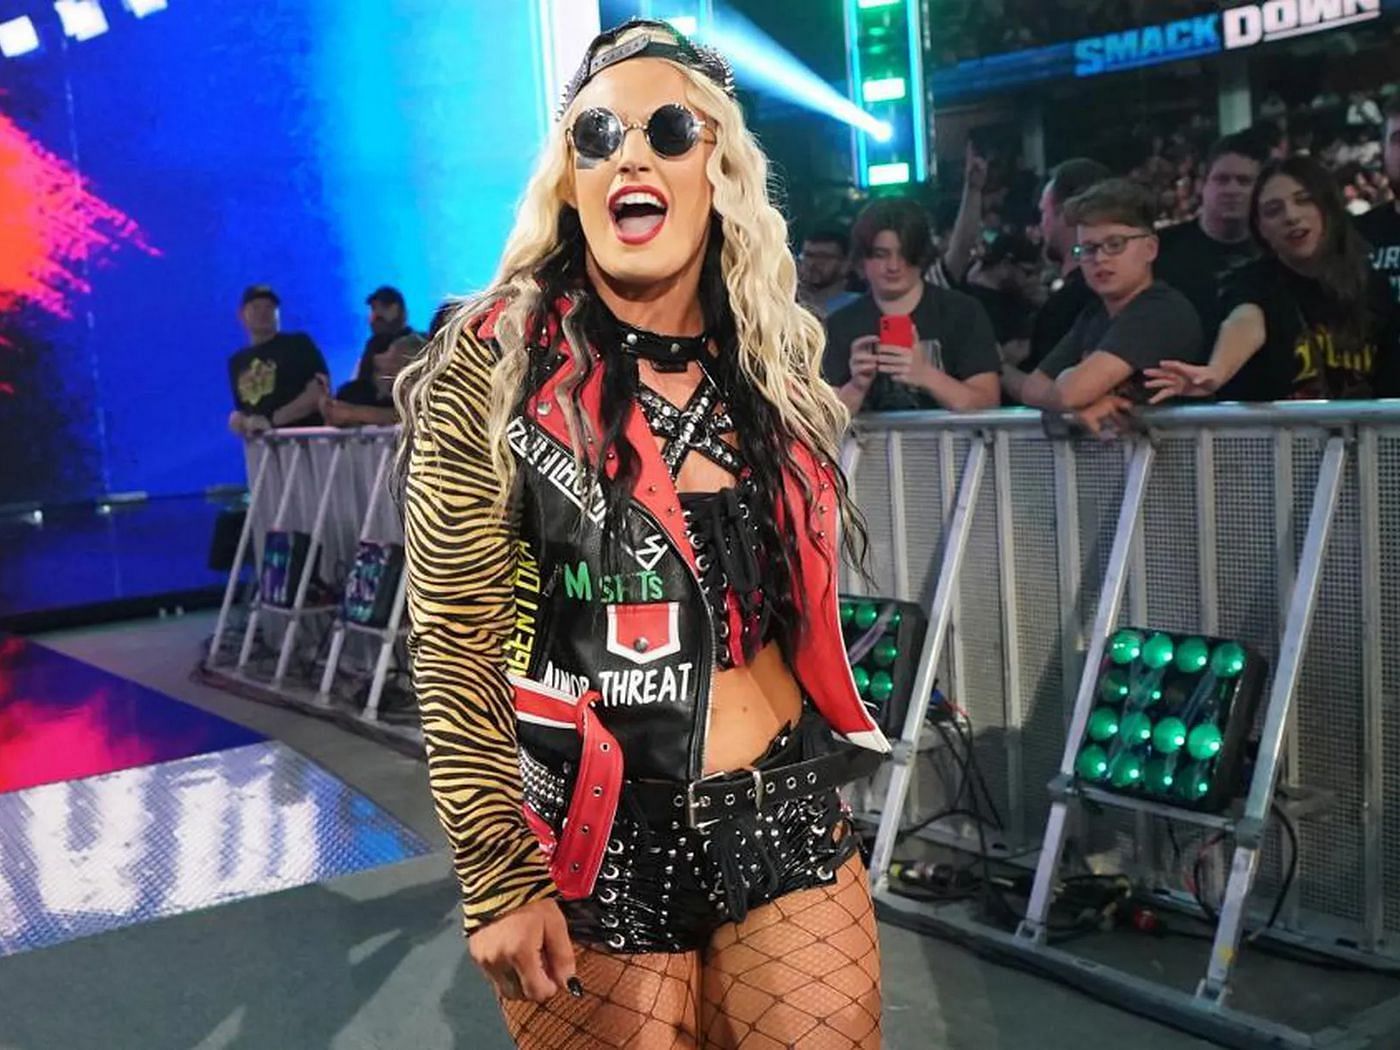 Toni Storm was called up to SmackDown during the 2021 WWE Draft